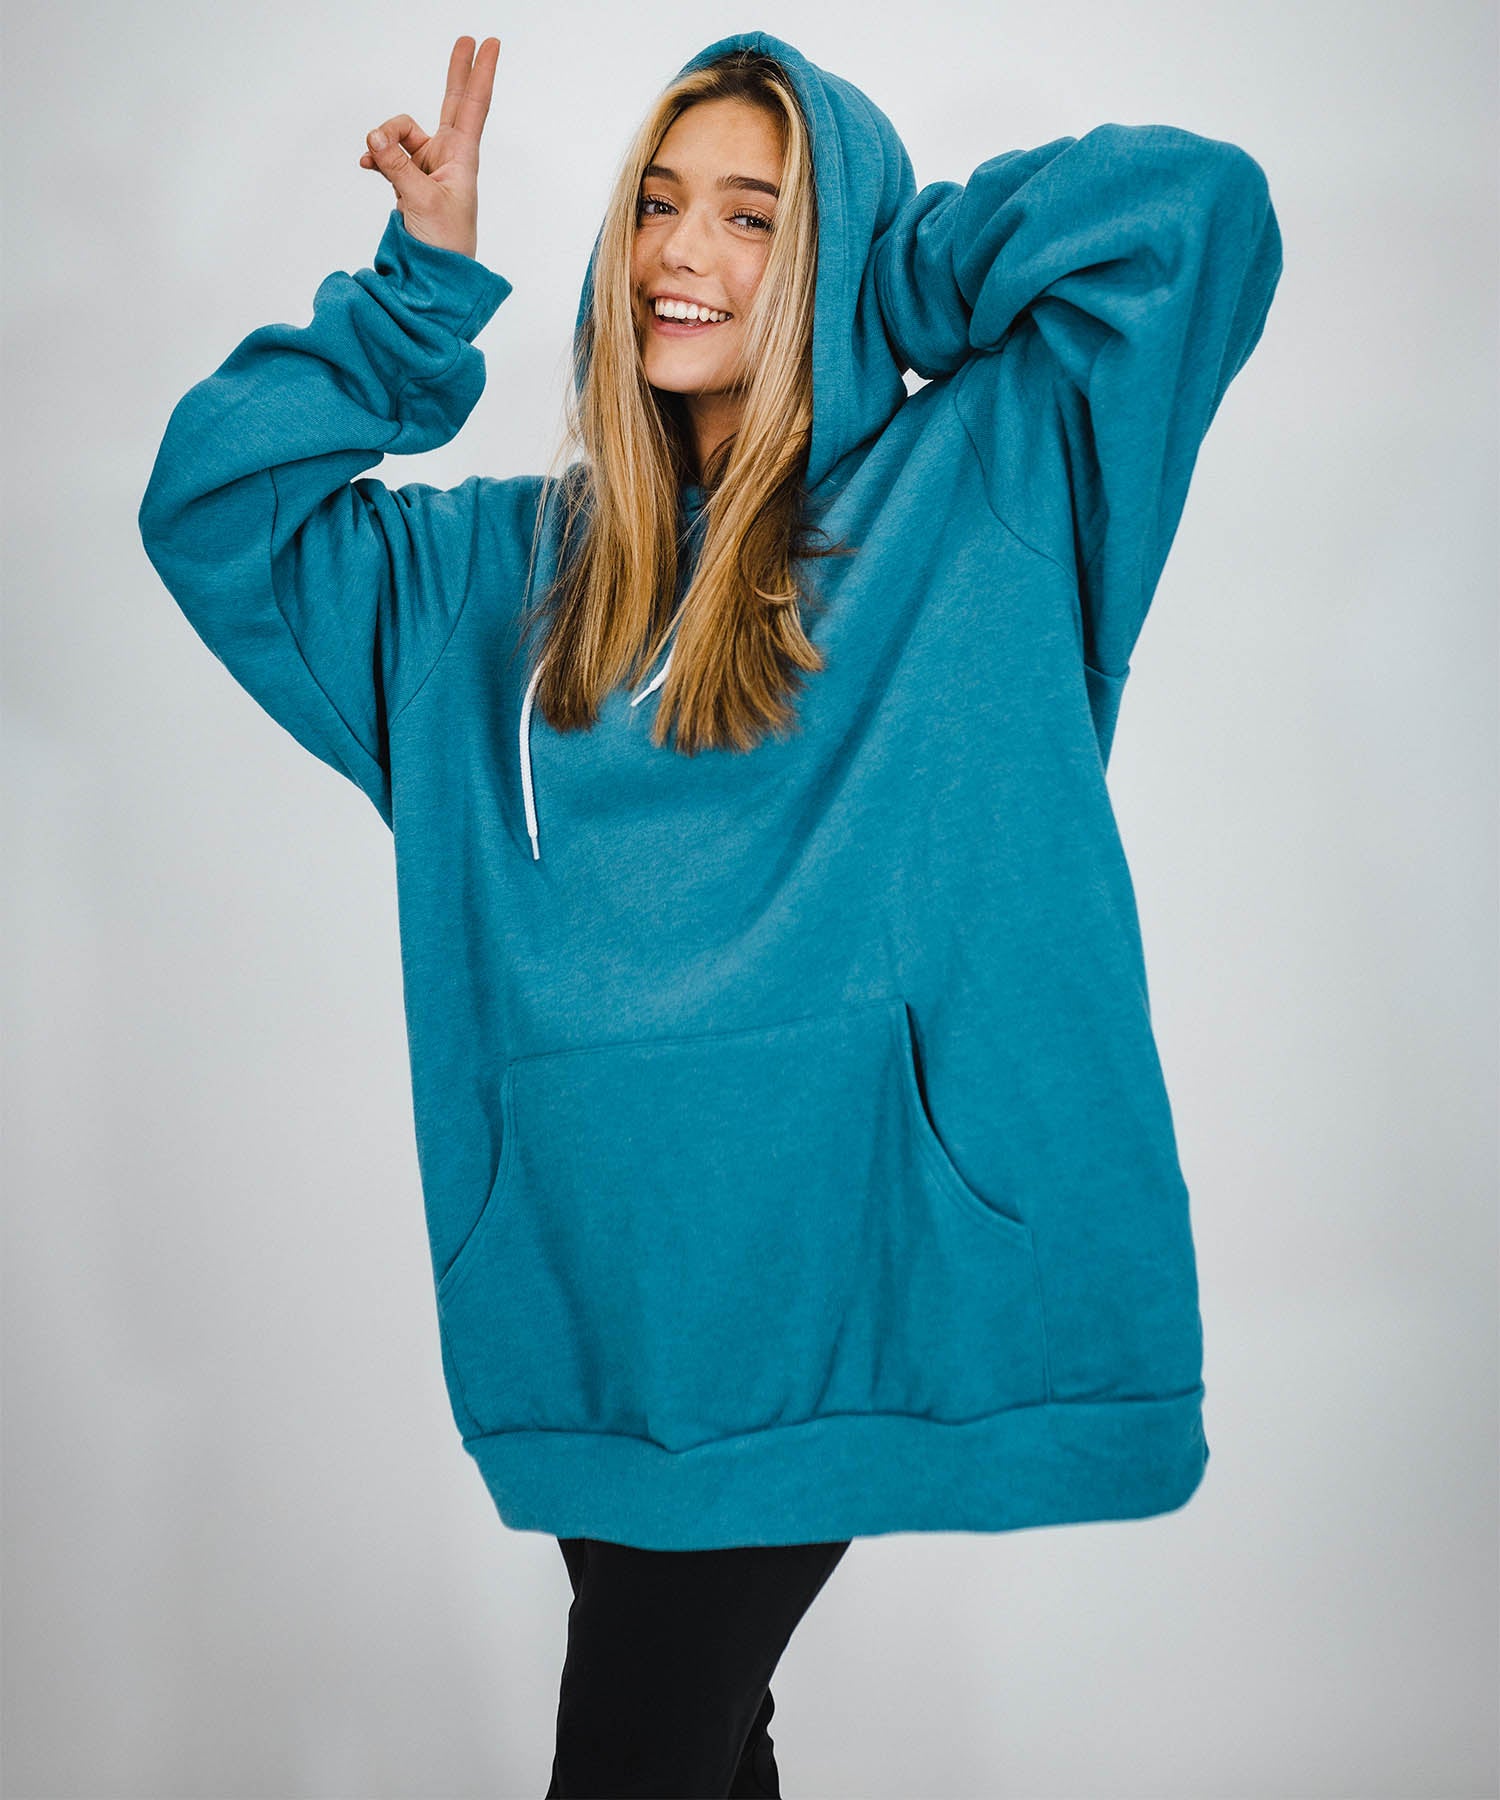 Pole Star Oversized Hoodie For Women - Aesthetic Shop